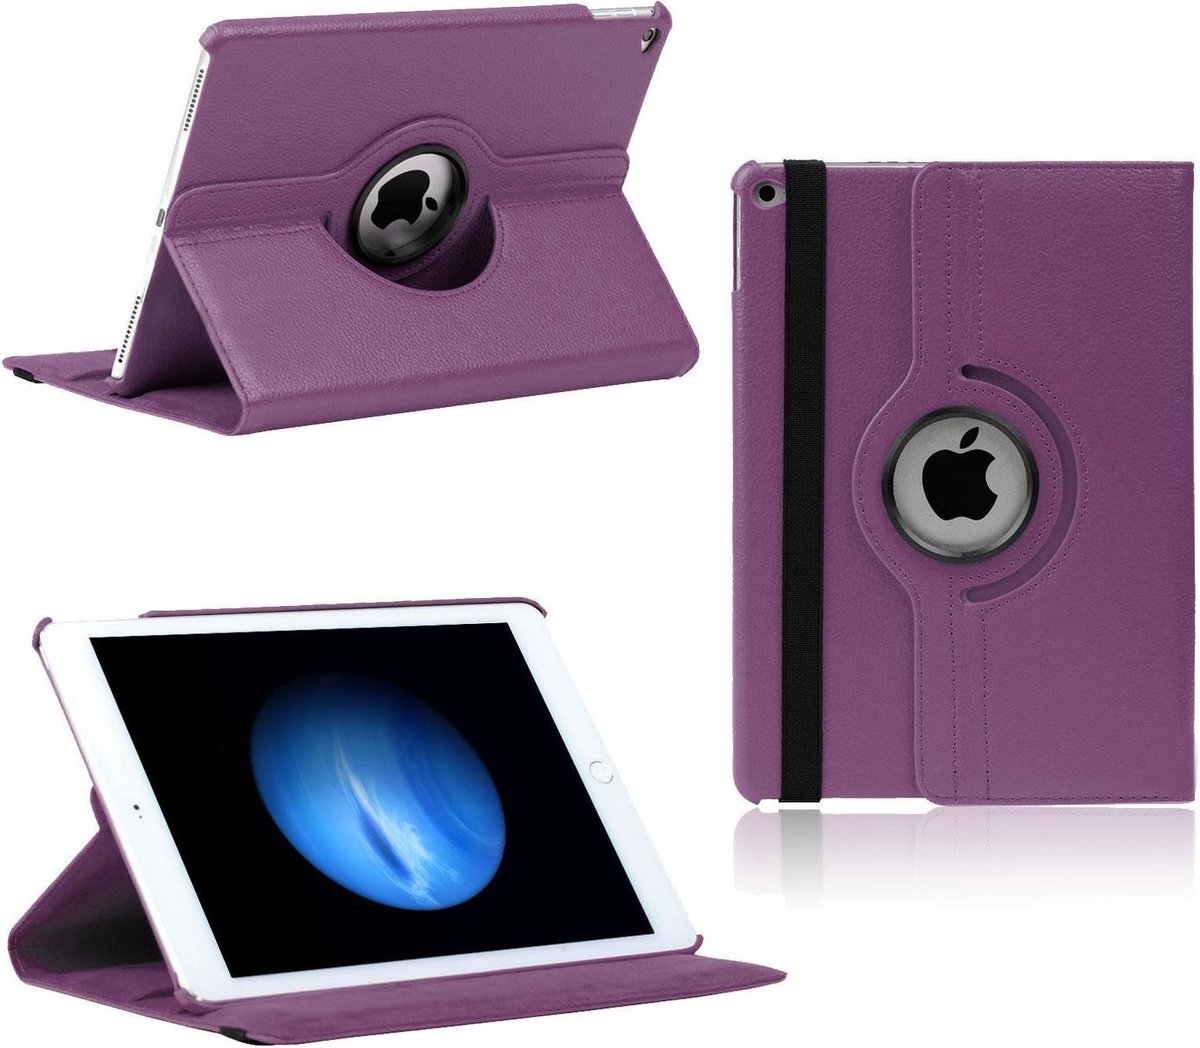 iPad Pro 12.9 Hoes Cover Multi-stand Case 360 graden draaibare paars